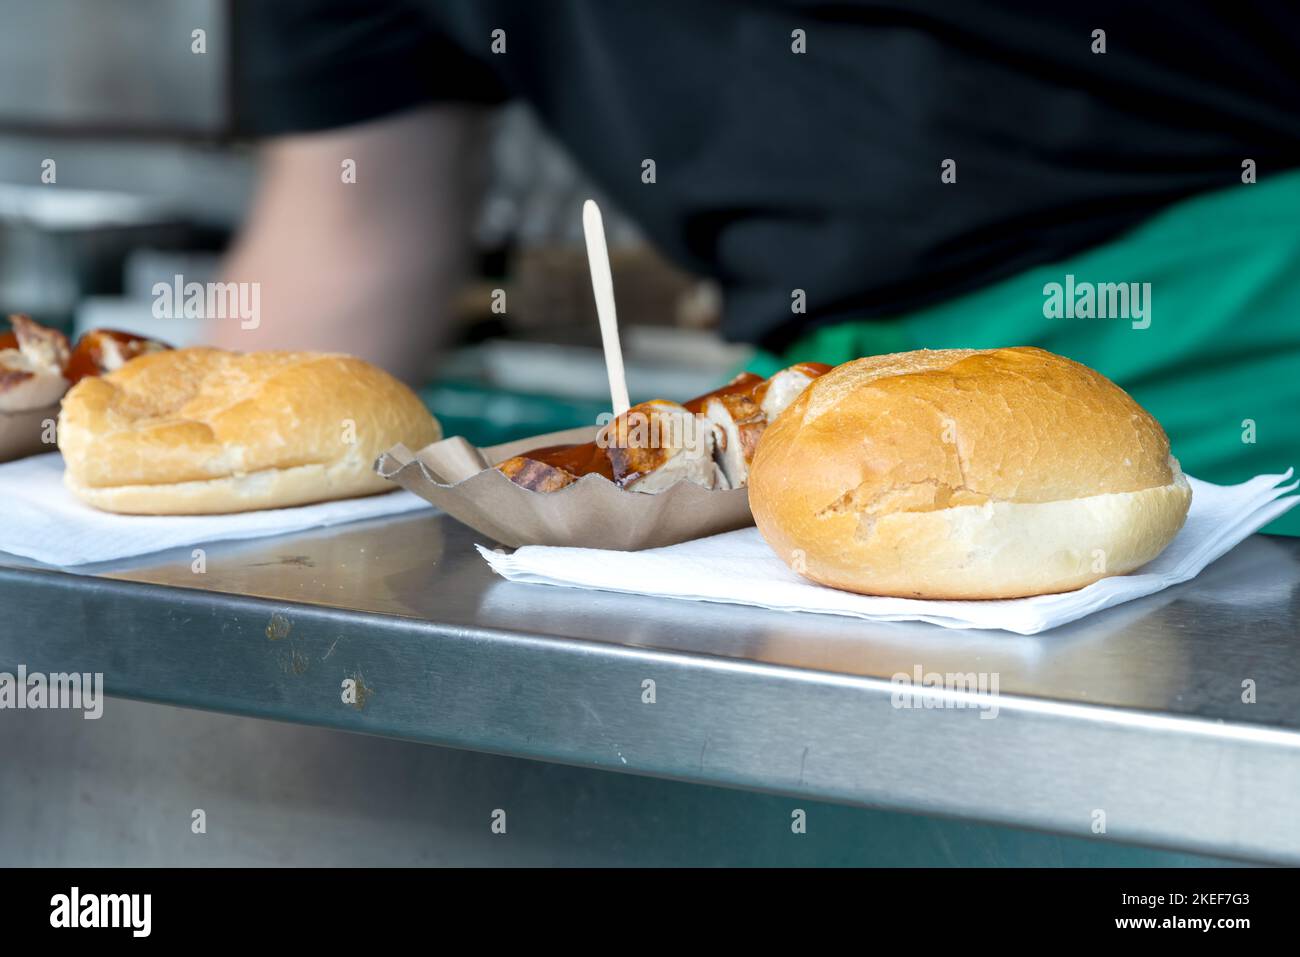 Currywurst with buns on the counter of a stall. Currywurst, grilled sausage cut into pieces with curry powder and ketchup sauce Stock Photo